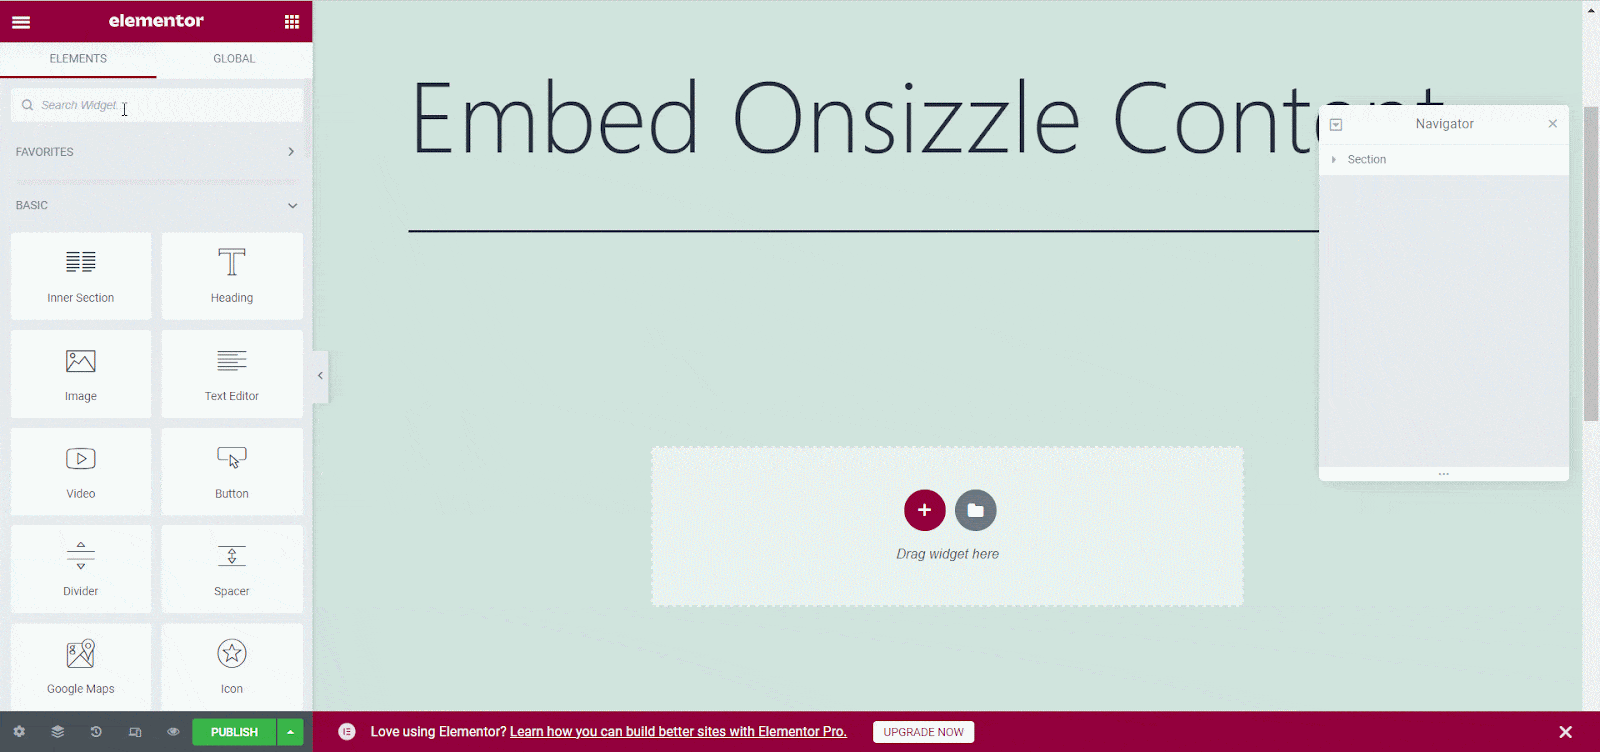 How To Embed Onsizzle Content